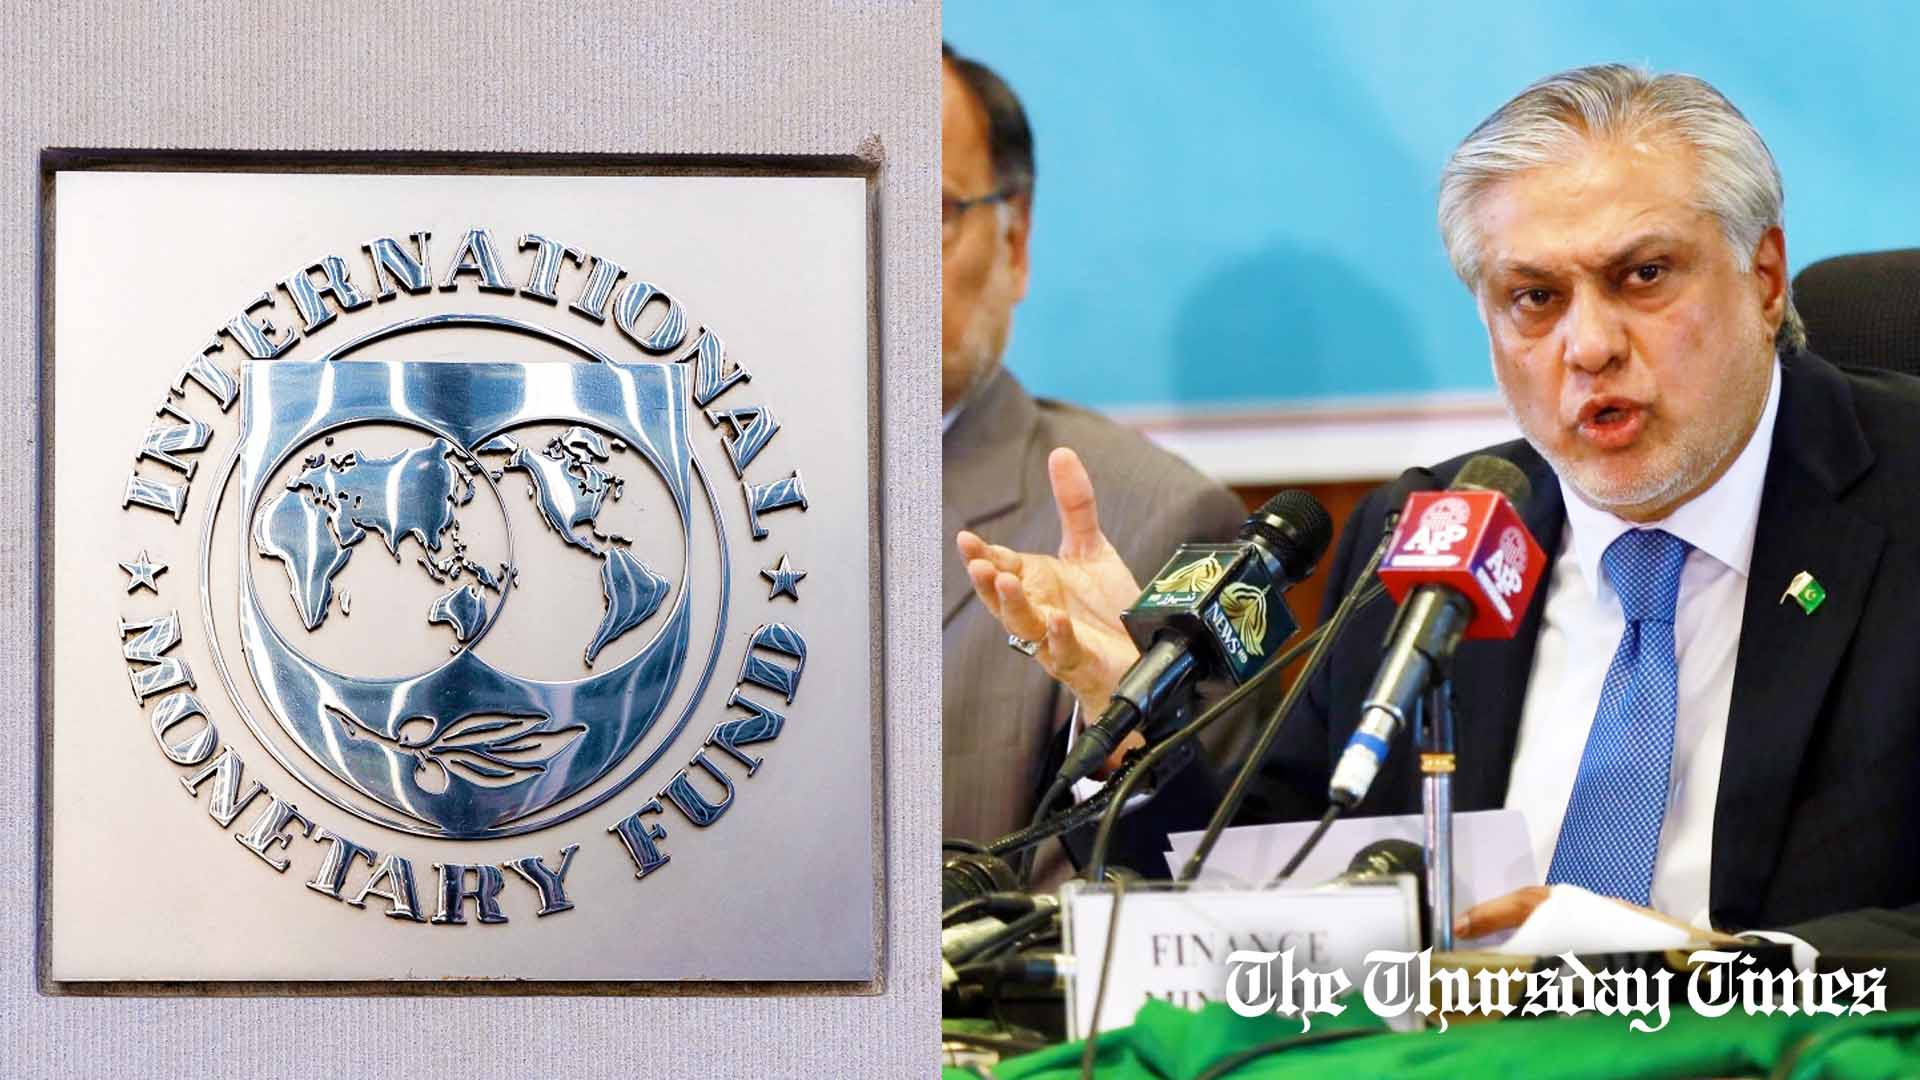 A combined file photo is shown of the IMF emblem at Washington, D.C. alongside finance minister Ishaq Dar addressing a press conference at Islamabad. — FILE/THE THURSDAY TIMES